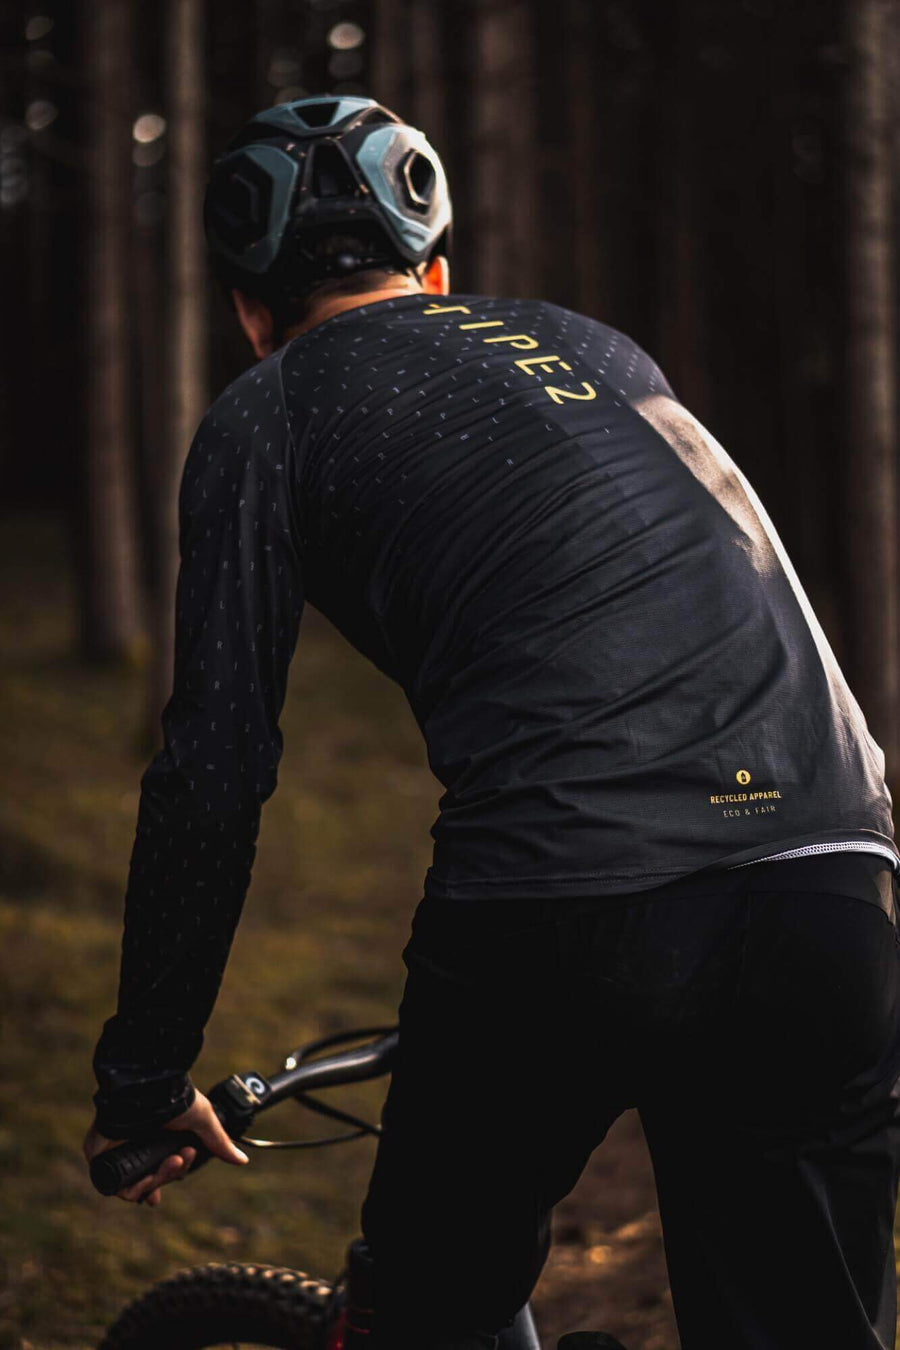 Men‘s - SWET LS Een Radtrikots % OUTLET ARCHIV192 2nd Edt. Anthracite EVO - Comfortable - Training Cut Frühjahr / Sommer Herbst / Winter L M Men Mountainbike206 Peacoat Radtrikots193 Recycled Polyester Recycled Polyester188 S spo-default spo-disabled spo-notify-me-disabled Winter-Guide XL XXL